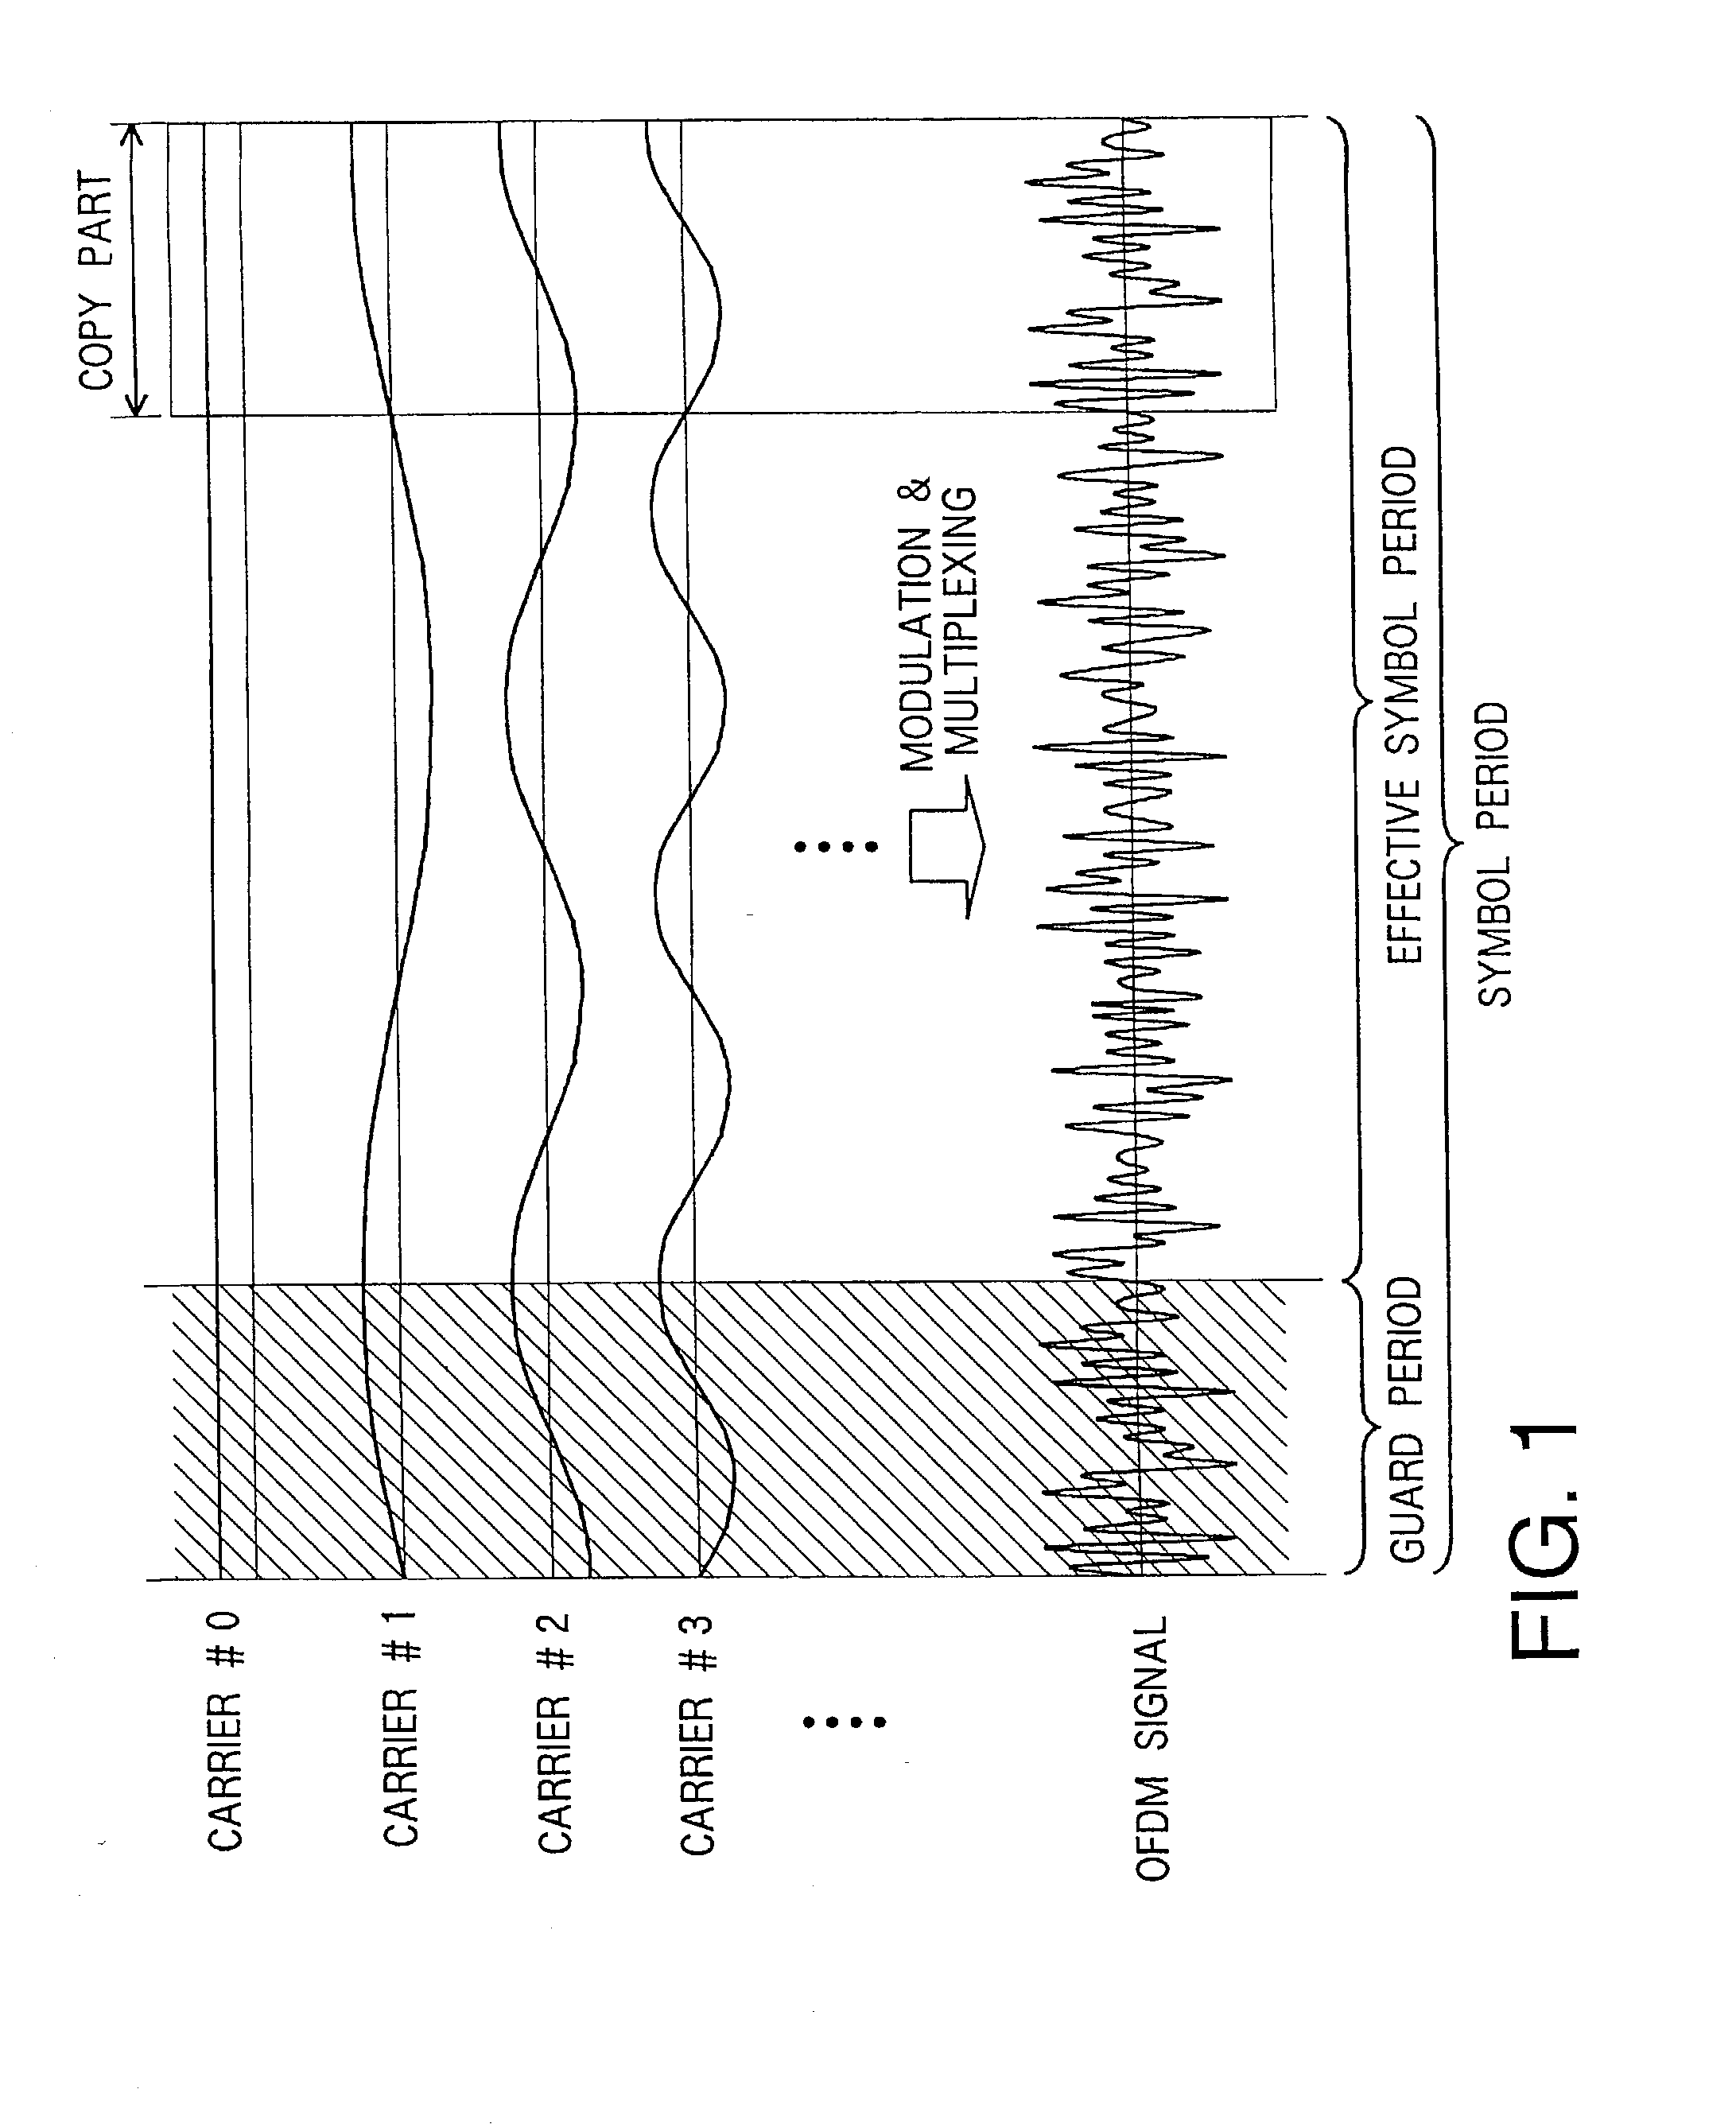 OFDM signal transmissions system, porable terminal, and E-commerce system